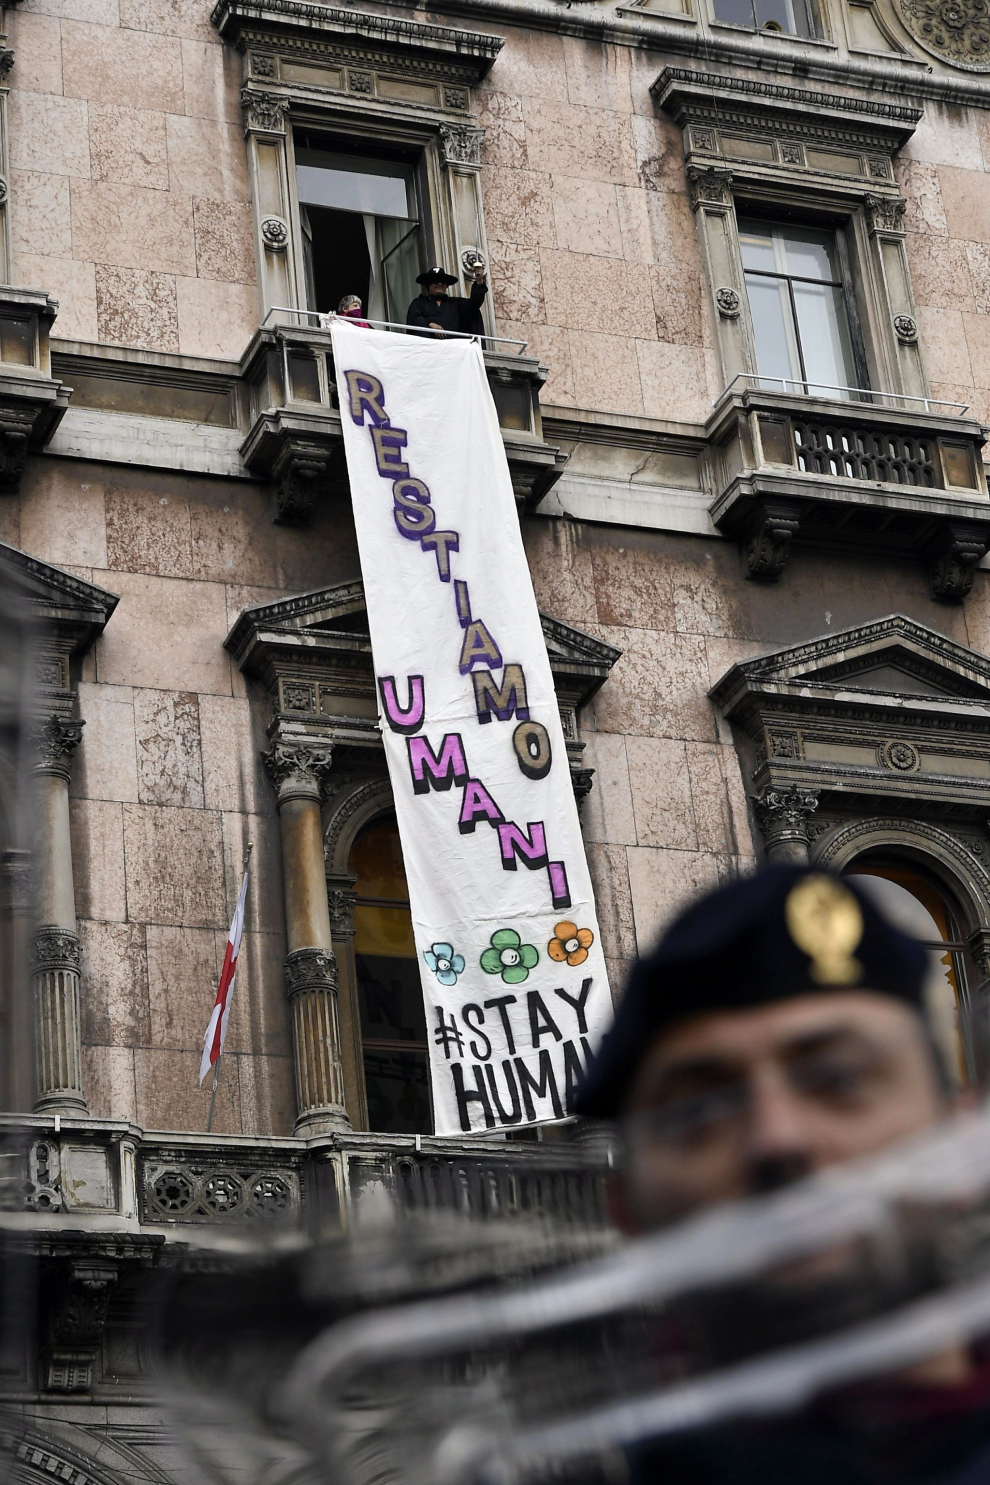 Milan (Italy), 18/05/2019.- A banner reading, both in English and in Italian, 'Let's stay human', has been unrolled during the meeting of European populist parties organized by Italian Interior Minister, Deputy Premier and leader of Italian party 'Lega' (League), Matteo Salvini, in Duomo square in Milan, Italy, 18 May 2019. A man dressed as Zorro with a plastic sword in his hand appeared from the balcony from which it was unrolled. (Elecciones, Italia) EFE/EPA/FLAVIO LO SCALZO Election campaign rally of the Lega party in Milan